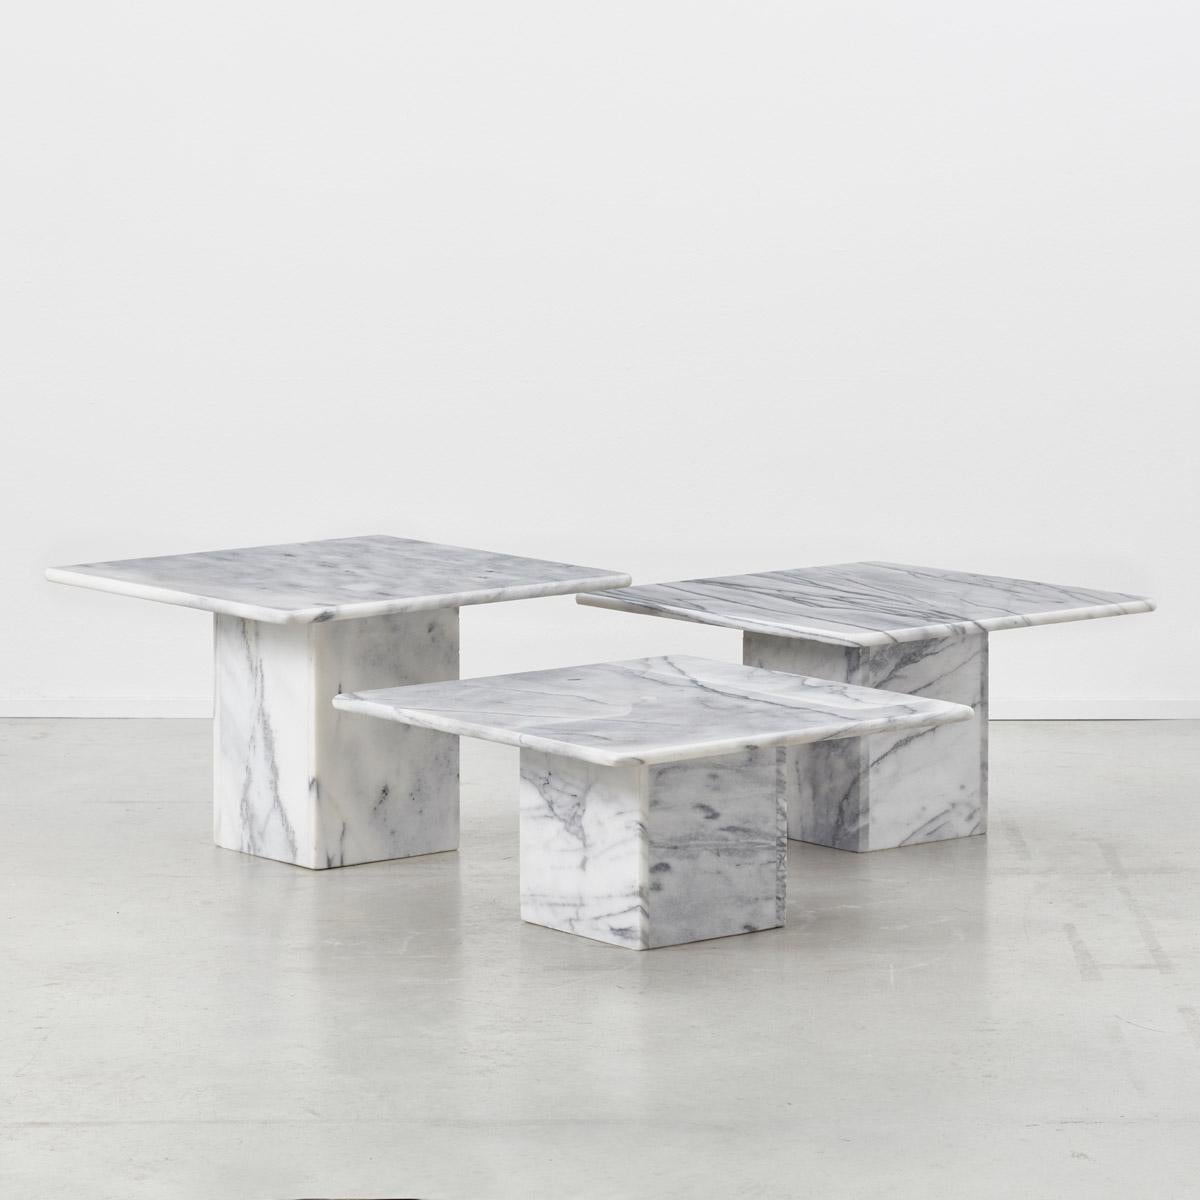 This set of three Carrara marble side tables offer a lot in terms of their versatility. A dynamic coffee table arrangement, low plinths or split them up and use as side tables. Their varying heights allow them to be overlapped in a really satisfying